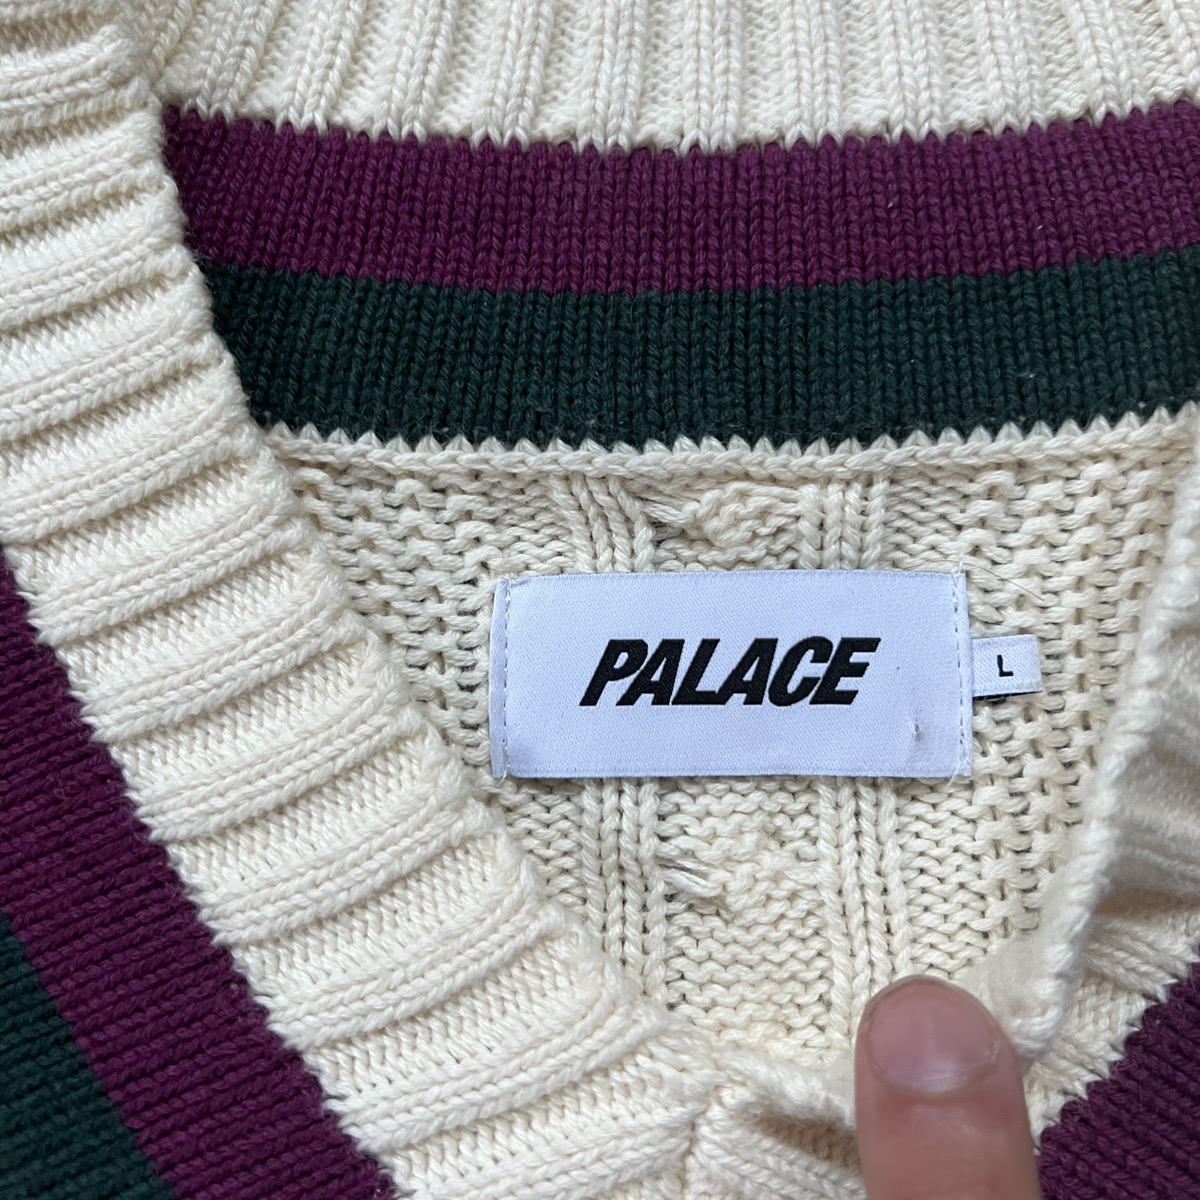 Palace Cable Knit Sweater - 4